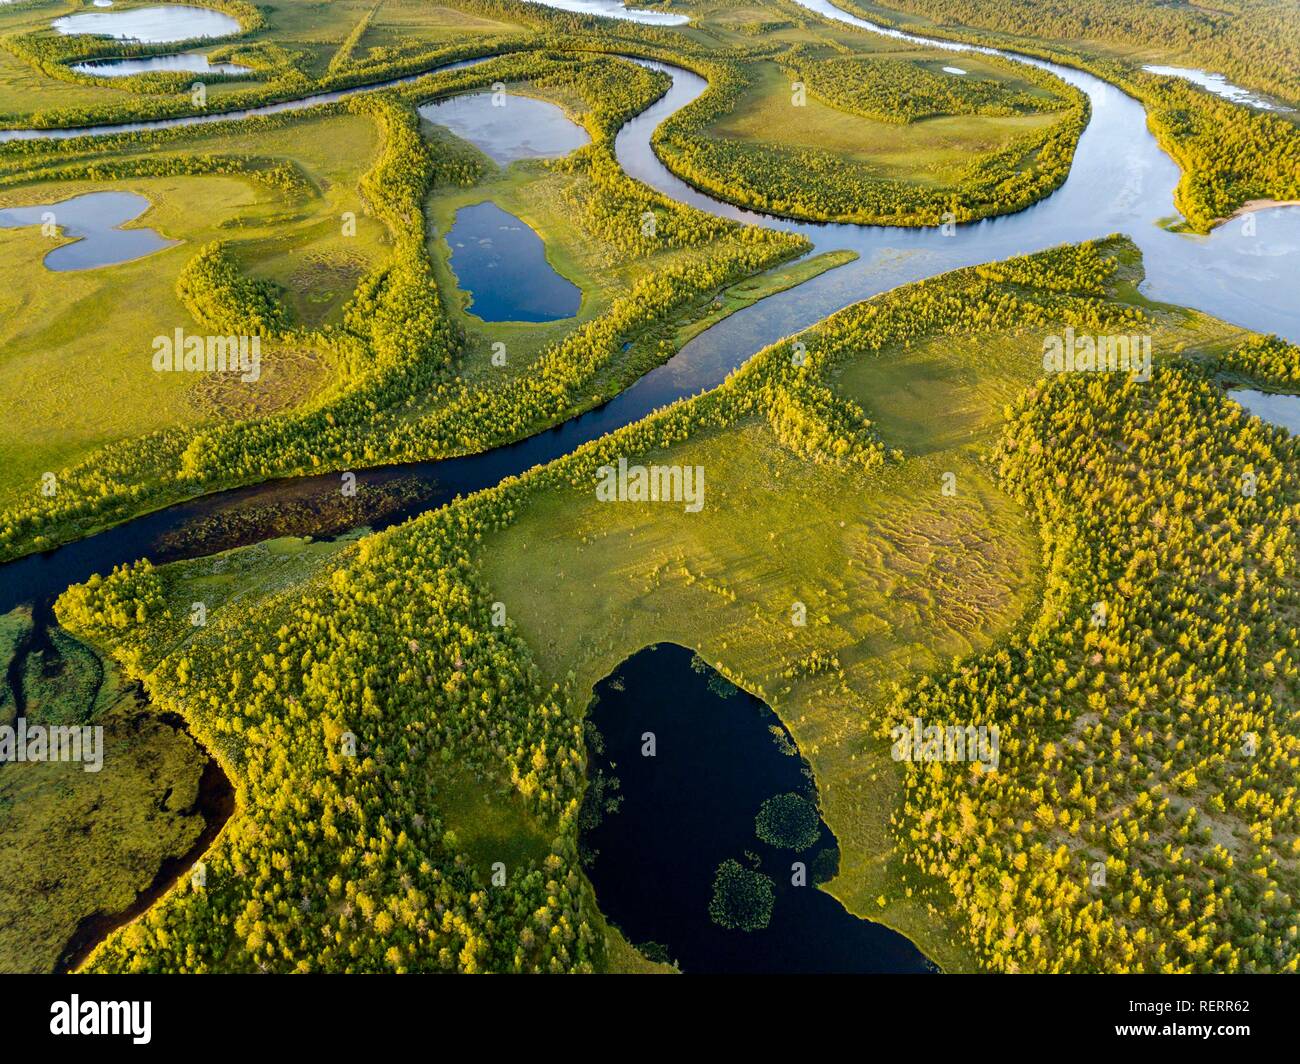 Drone view, aerial photo of Vuontisjärvi, small lakes and meanders, river loops in boreal arctic forest with conifers Stock Photo